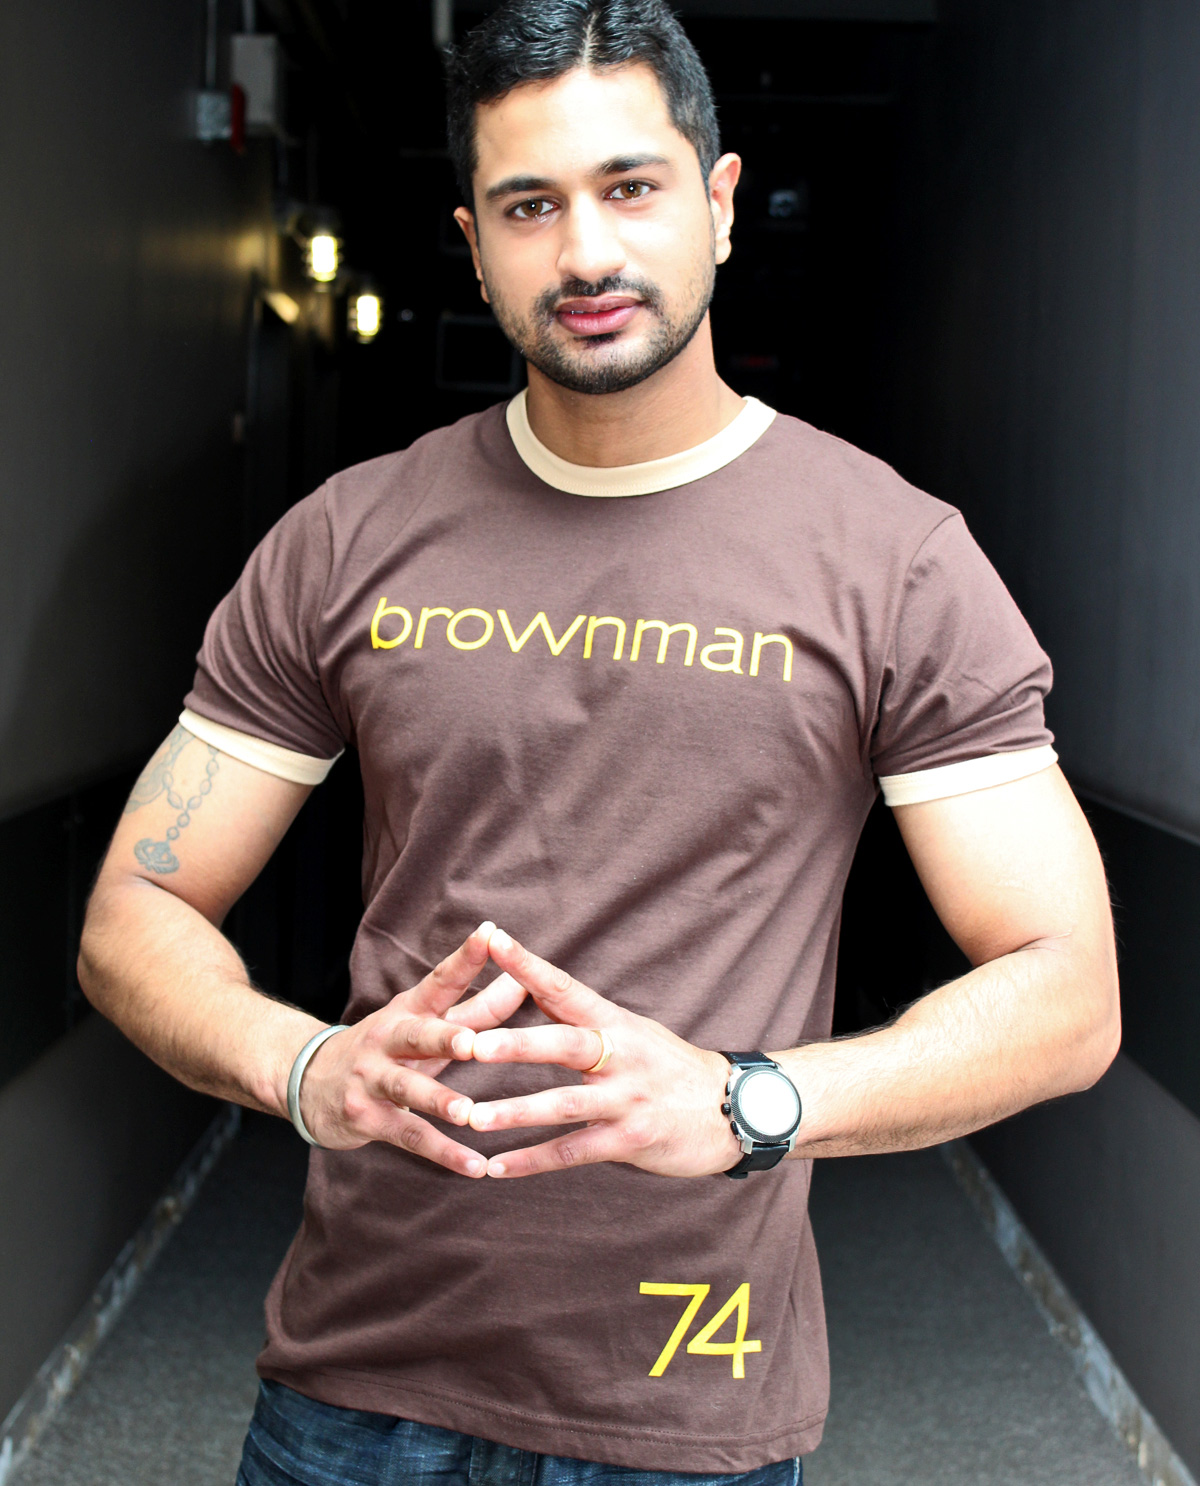 South Asian Male Model wearing American Apparel Brown Ringer T Shirt Graphic Design T.shirt with brownman74 graphic design on front.